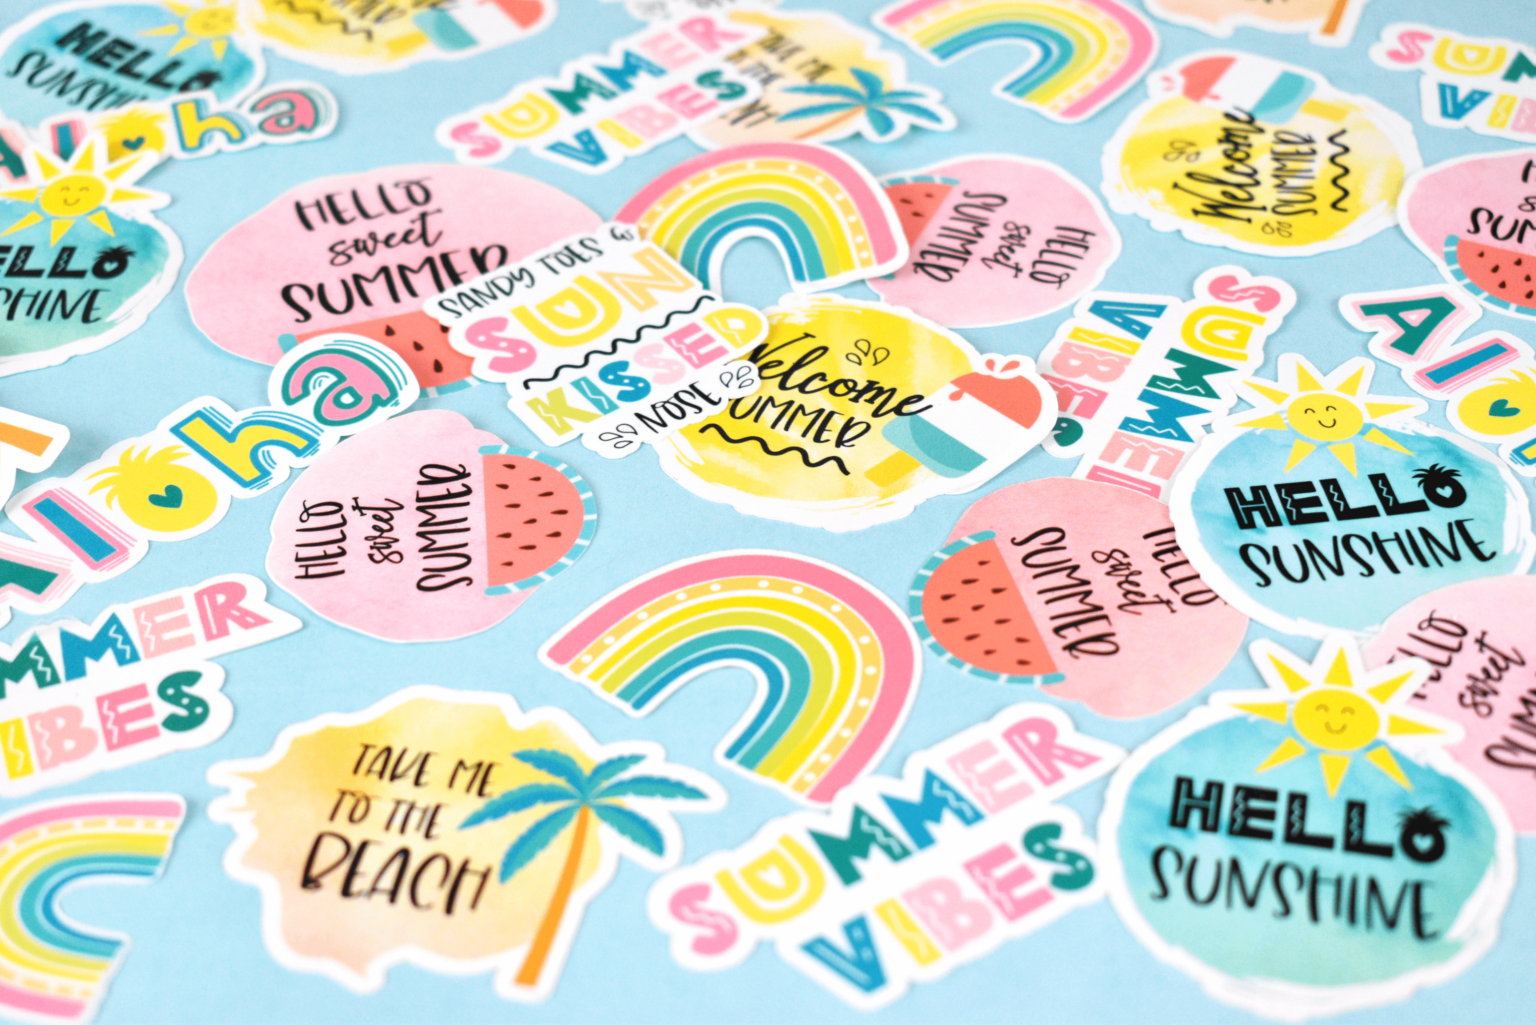 A close look at print-then-cut stickers on a light blue background. The stickers were cut using a Cricut machine. The stickers have summer-themed illustrations and quotes such as "Hello Sunshine," "Take Me to the Beach," and "Hello Sweet Summer." There are rainbows, palm trees, suns, and more on the stickers.